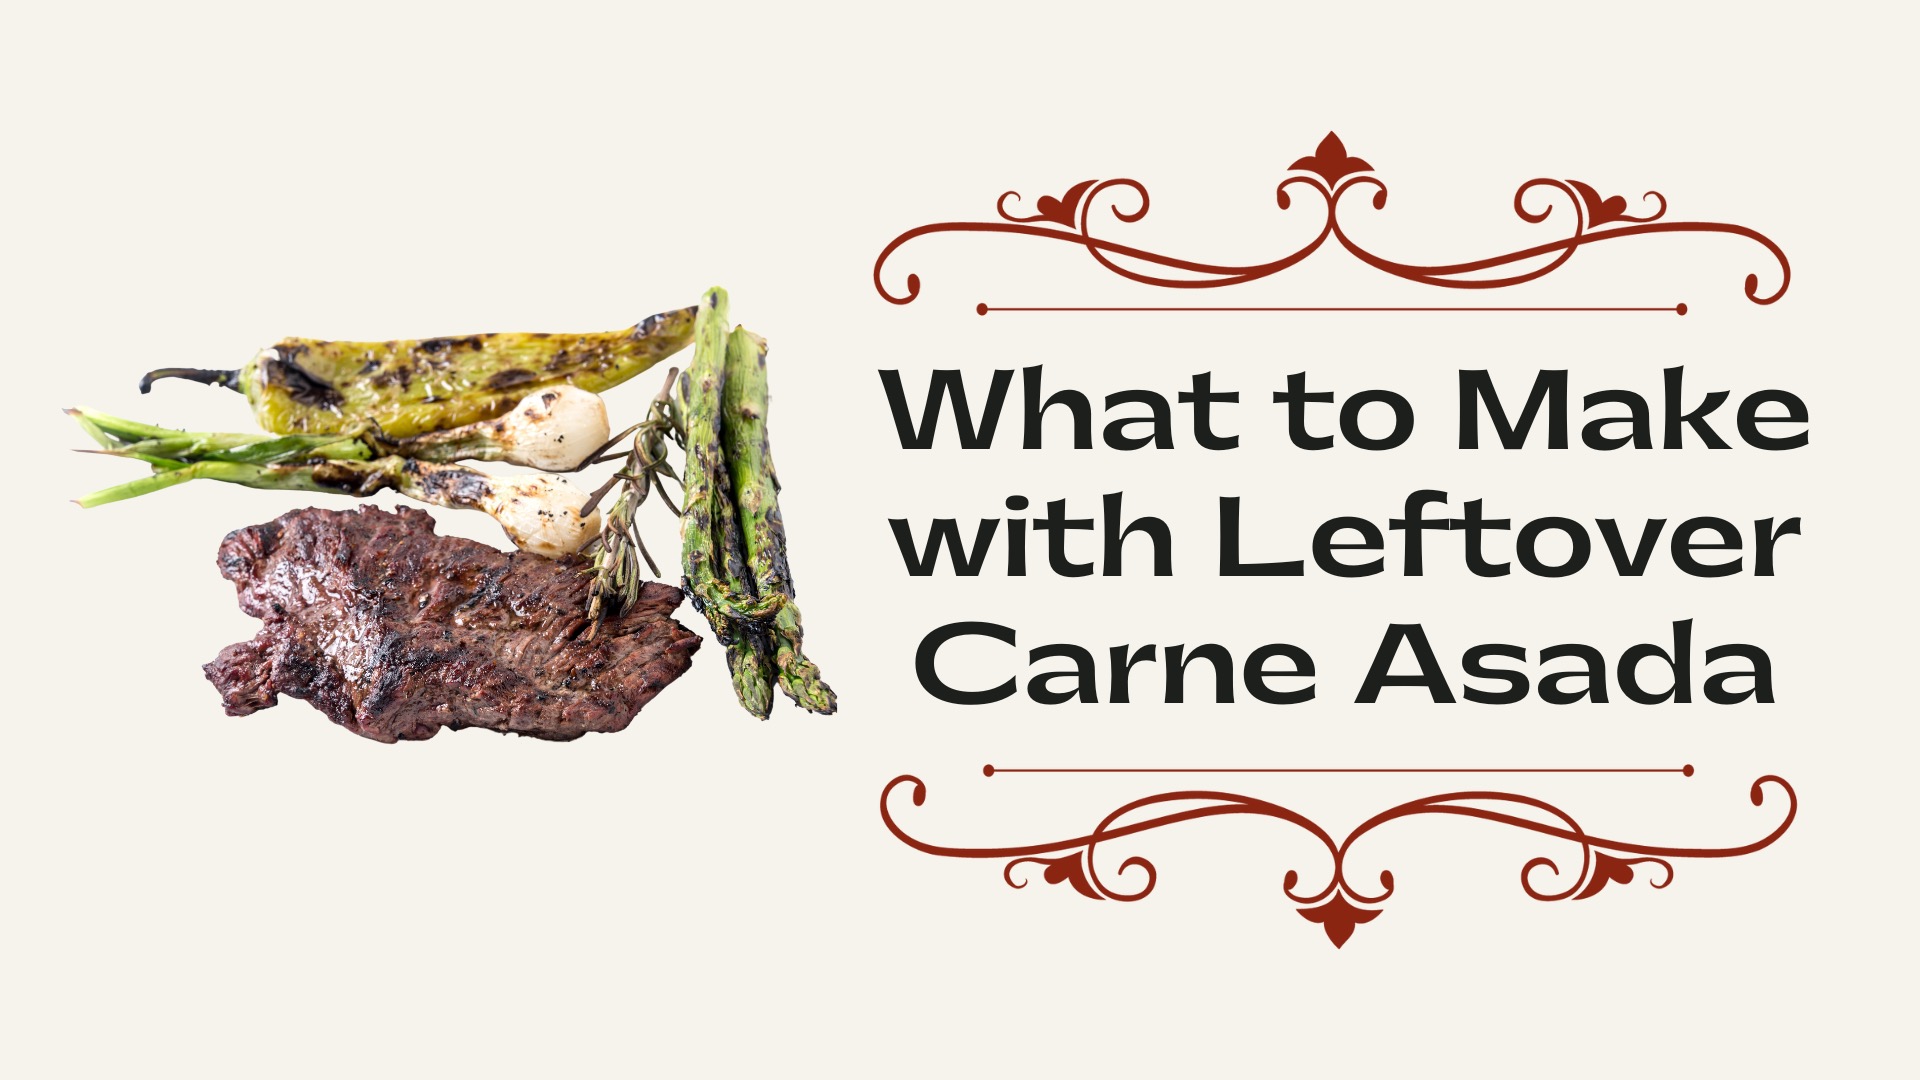 What to Make with Leftover Carne Asada